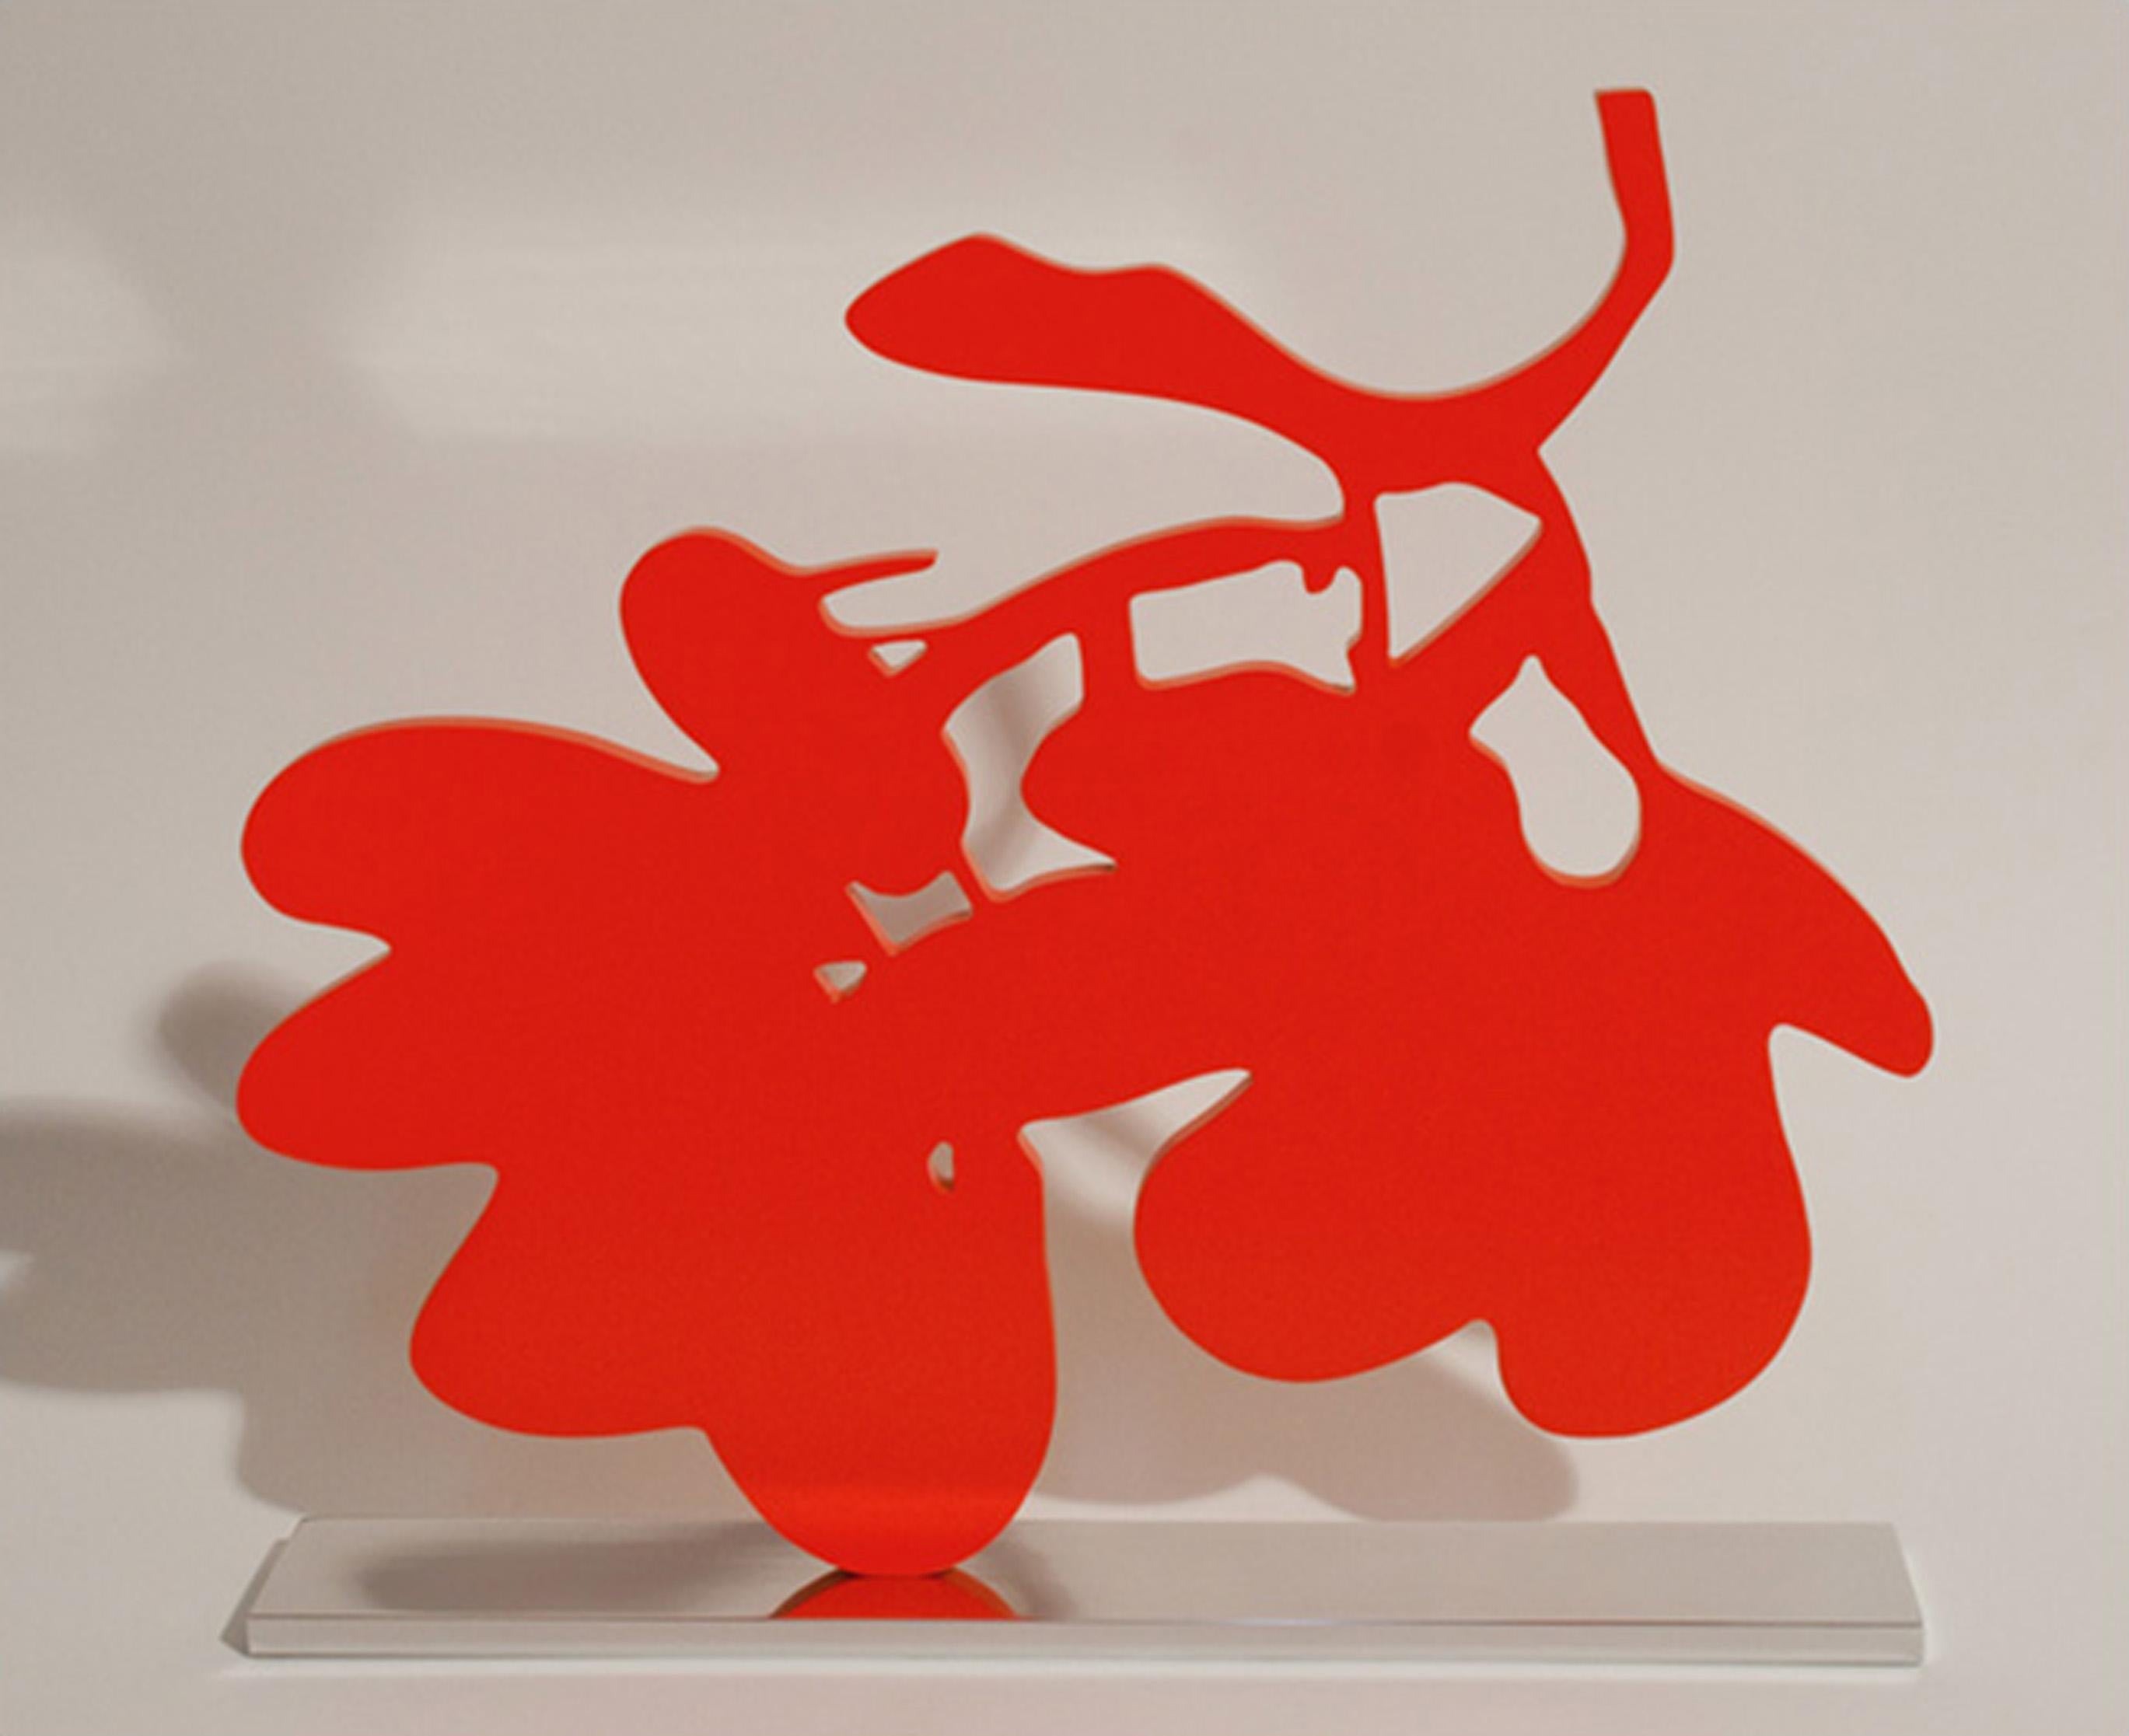 Donald Sultan Abstract Sculpture - Red Lantern Flower ed. 17/20